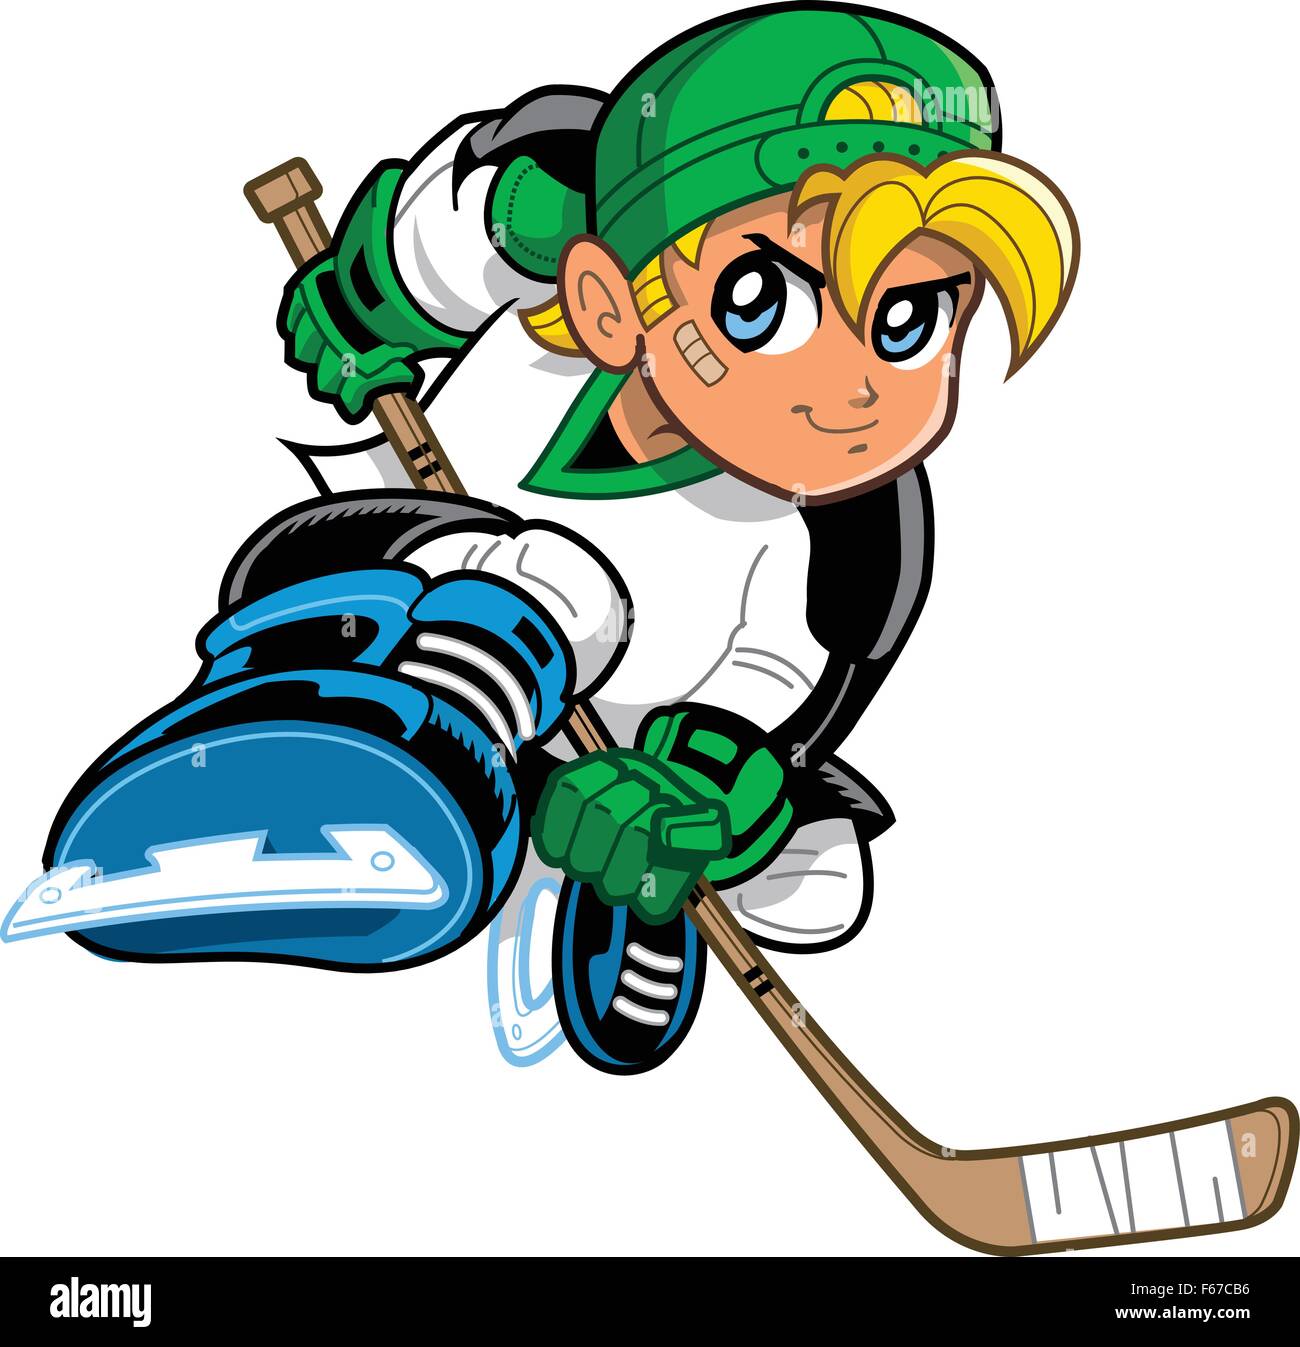 Anime and manga style blonde boy ice hockey player, with mischievous smile and determined look on his face, skating and holding  Stock Vector